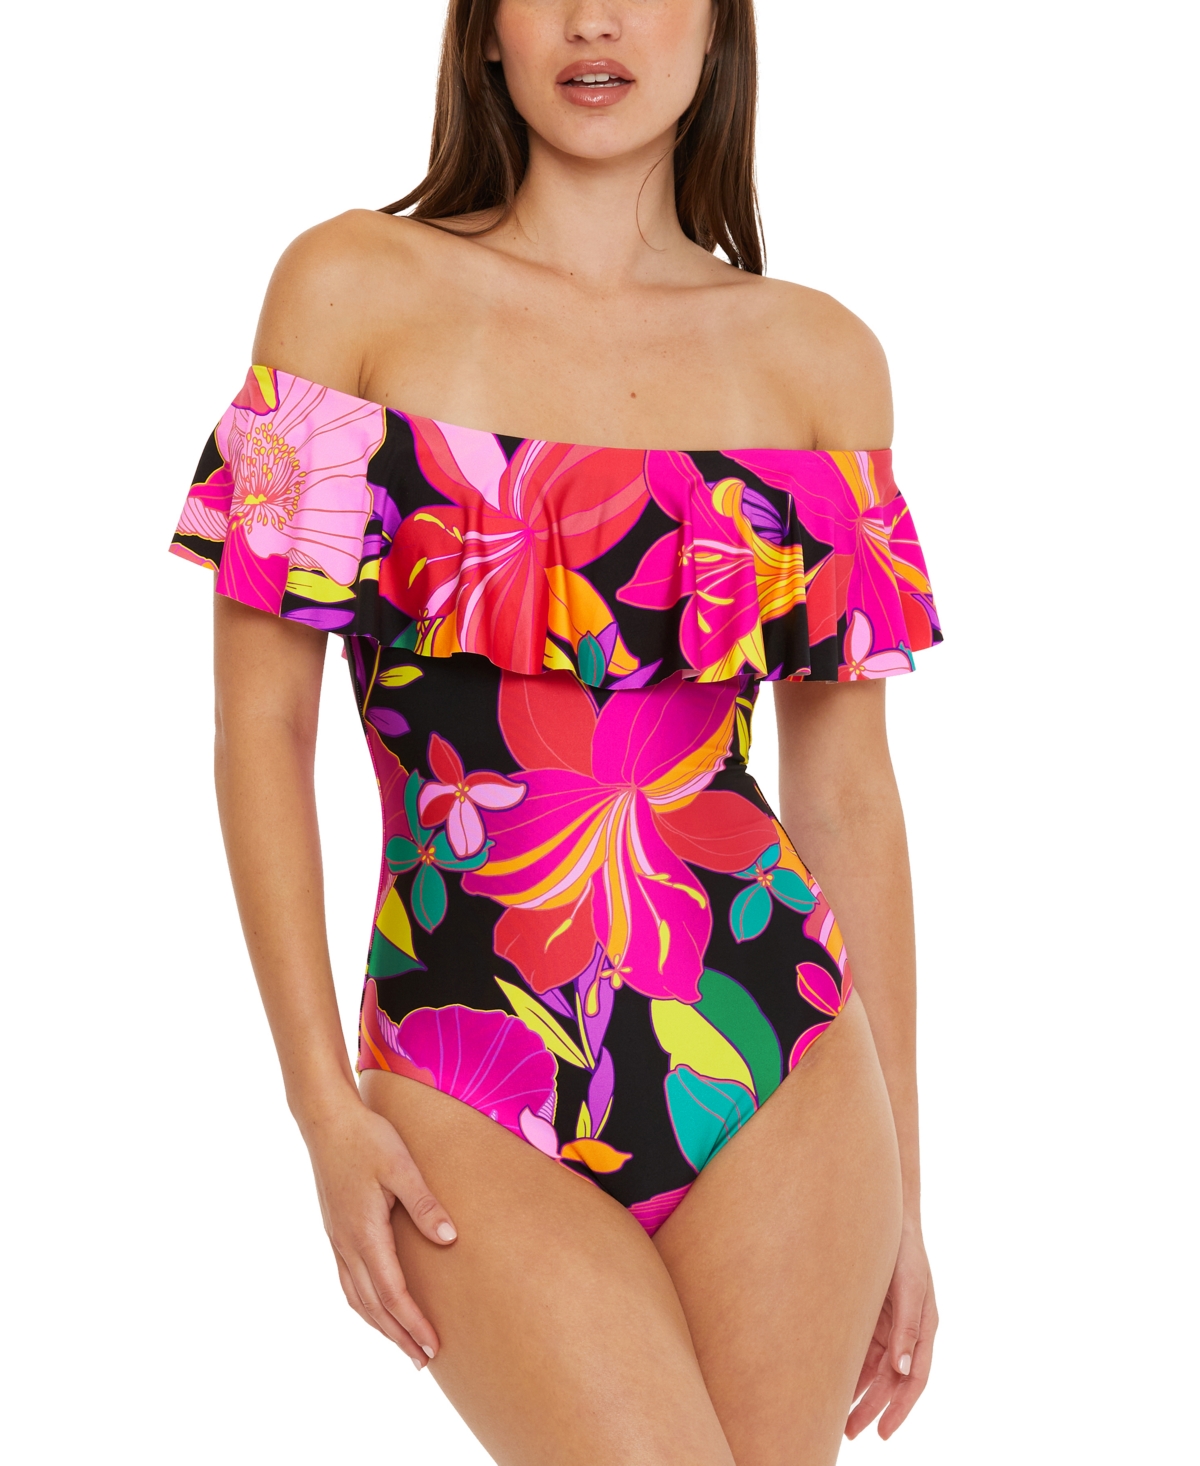 Women's Solar Floral Ruffled Off-The-Shoulder One-Piece Swimsuit - Multi